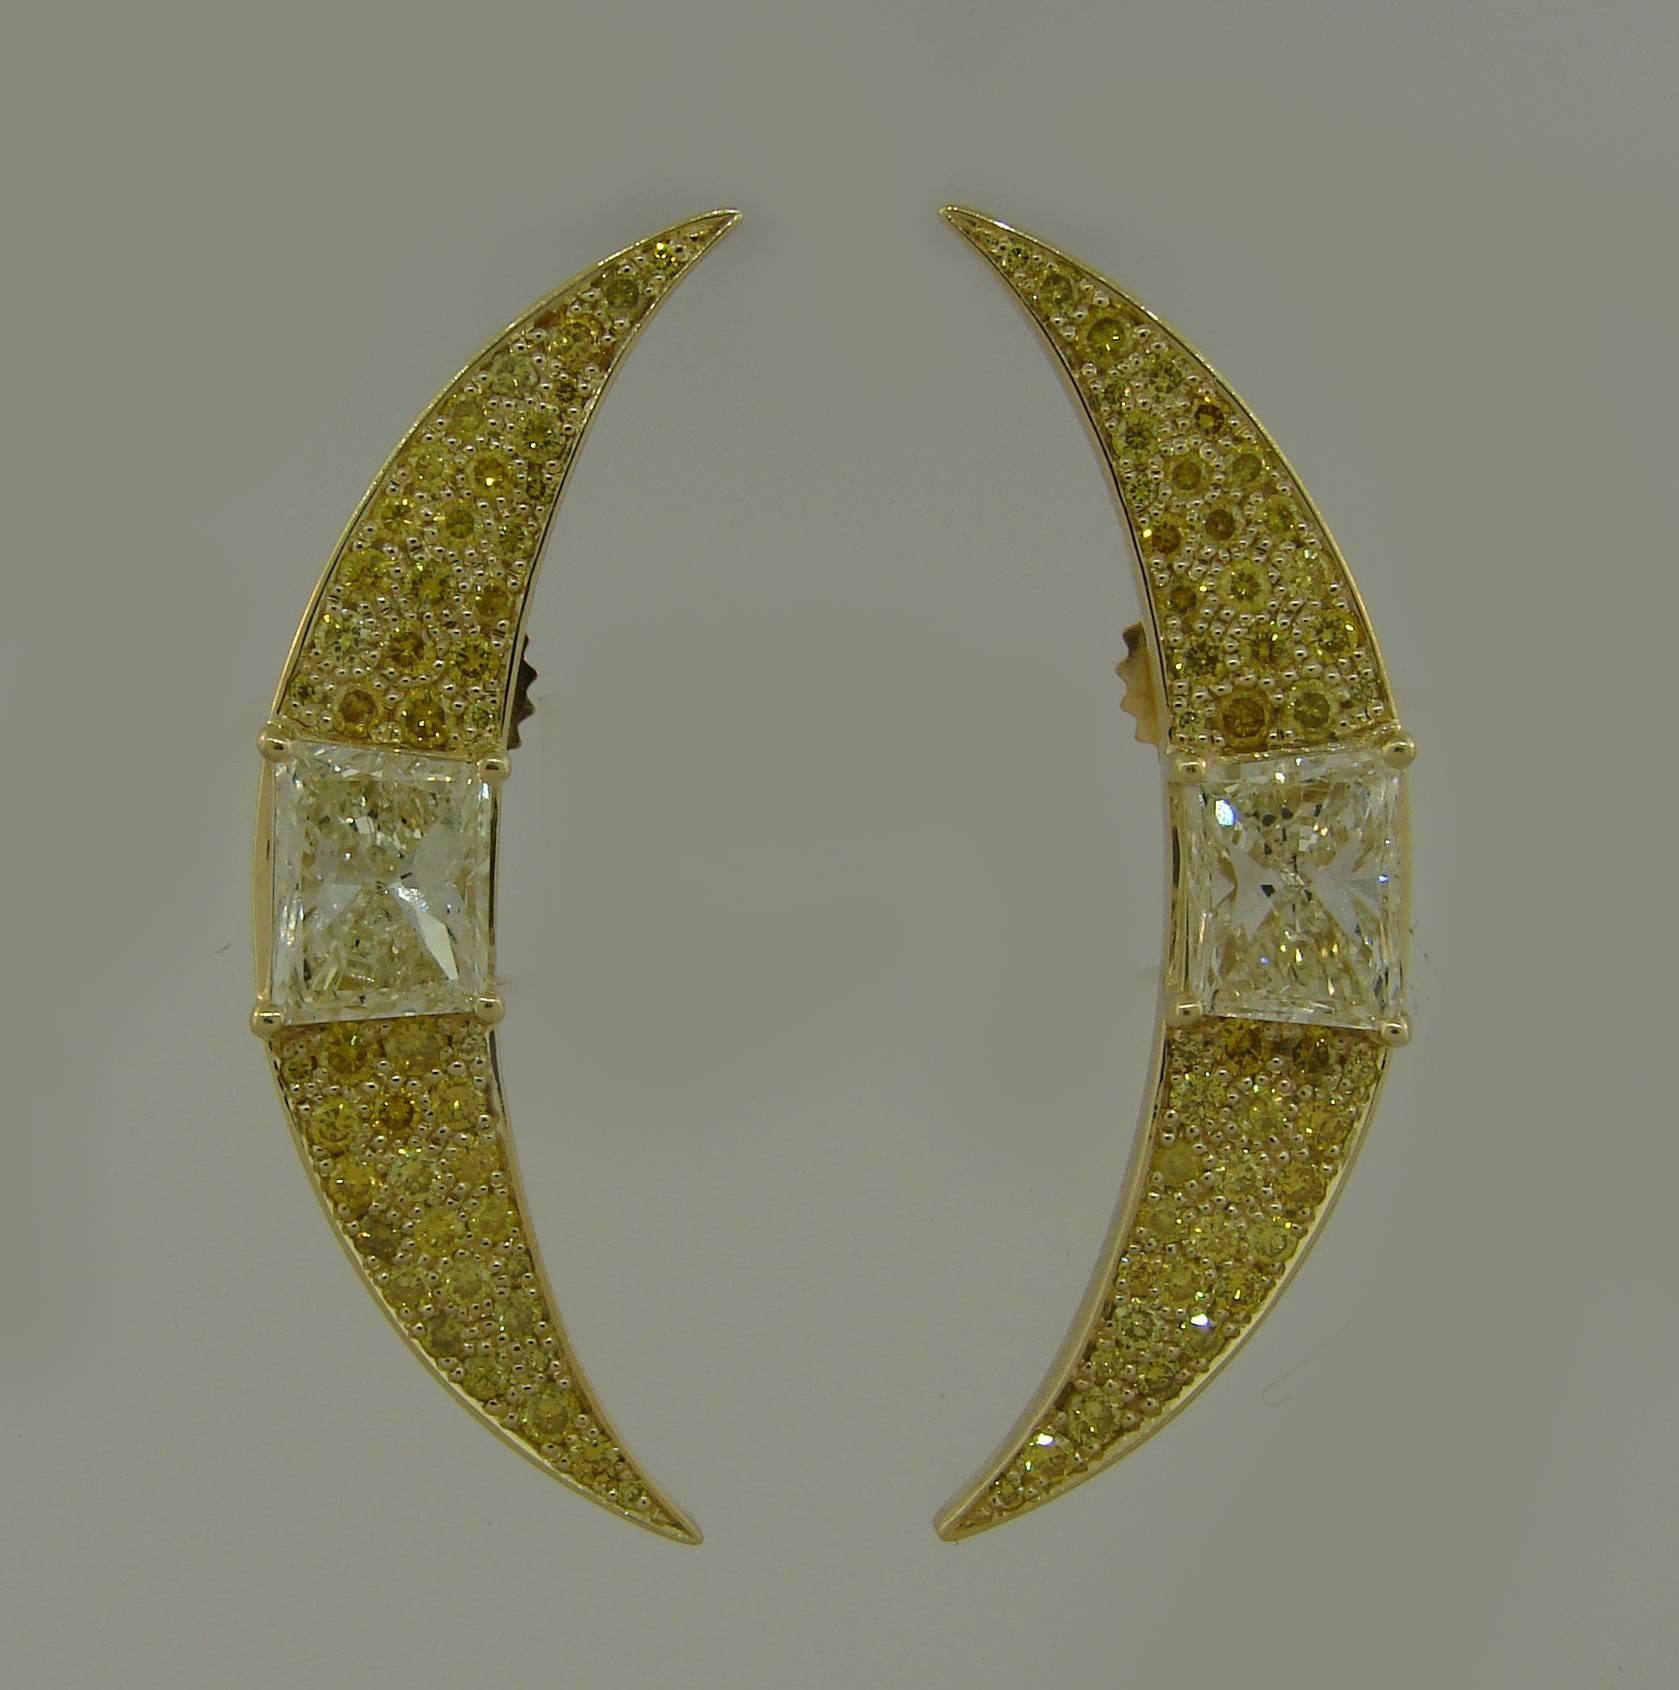 A pair of gorgeous crescent earrings. Chic and elegant, they are a great addition to your jewelry collection. 
Made of 17 karat (tested) yellow gold, the earrings feature two trapezoid shape light fancy yellow diamonds and round brilliant cut